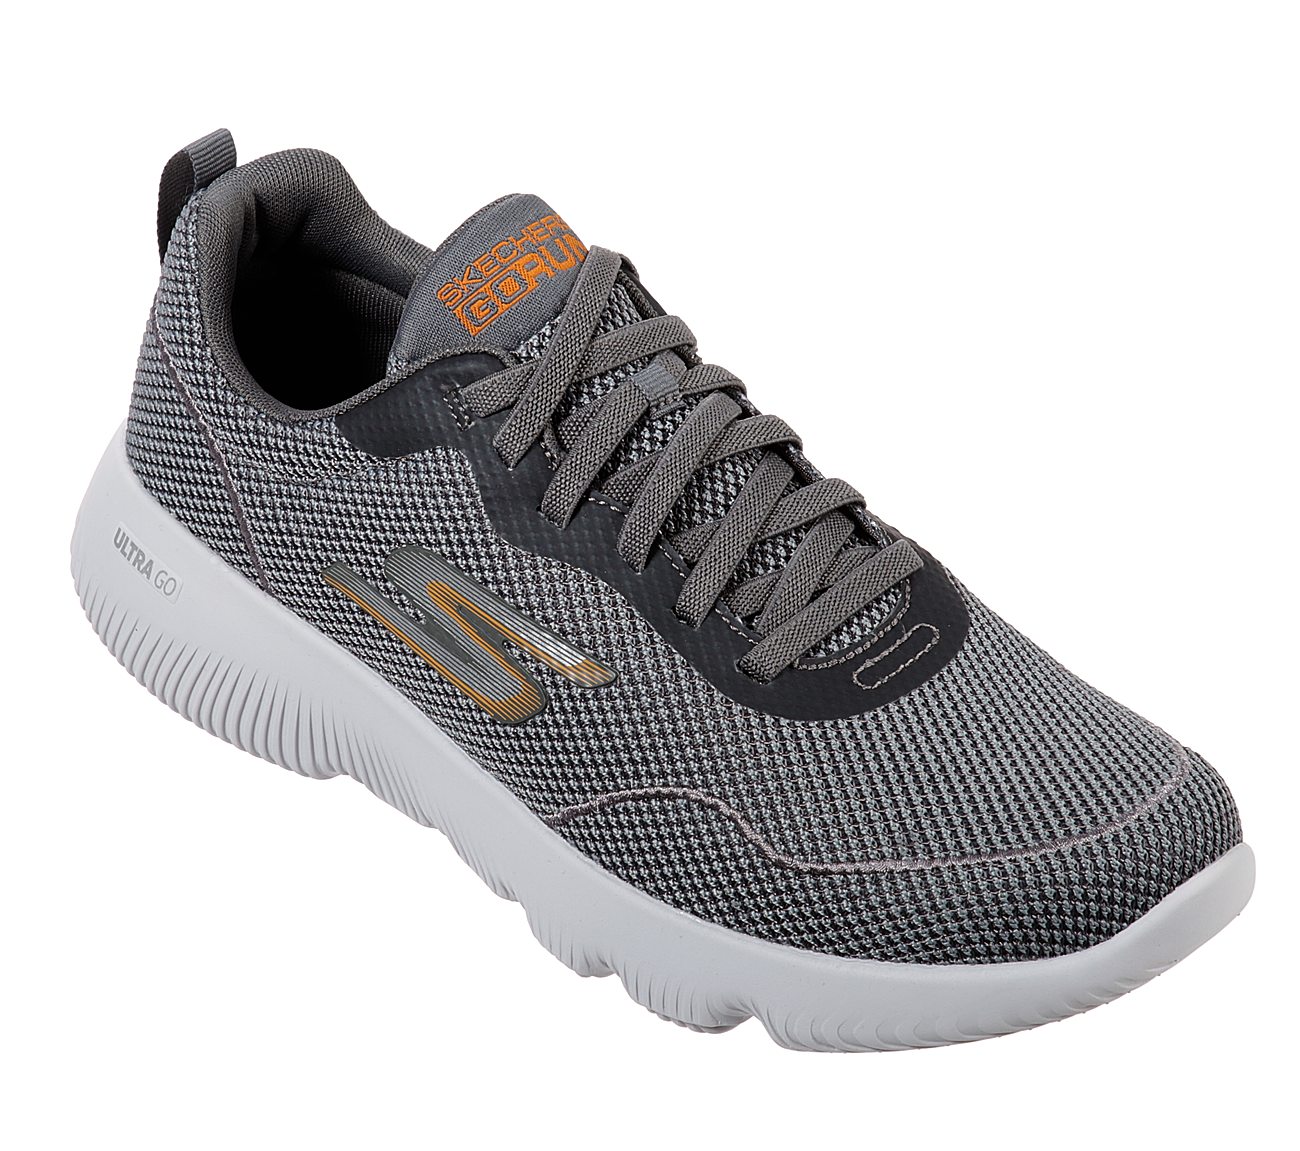 GO RUN FOCUS-FORGED, CHARCOAL/ORANGE Footwear Lateral View